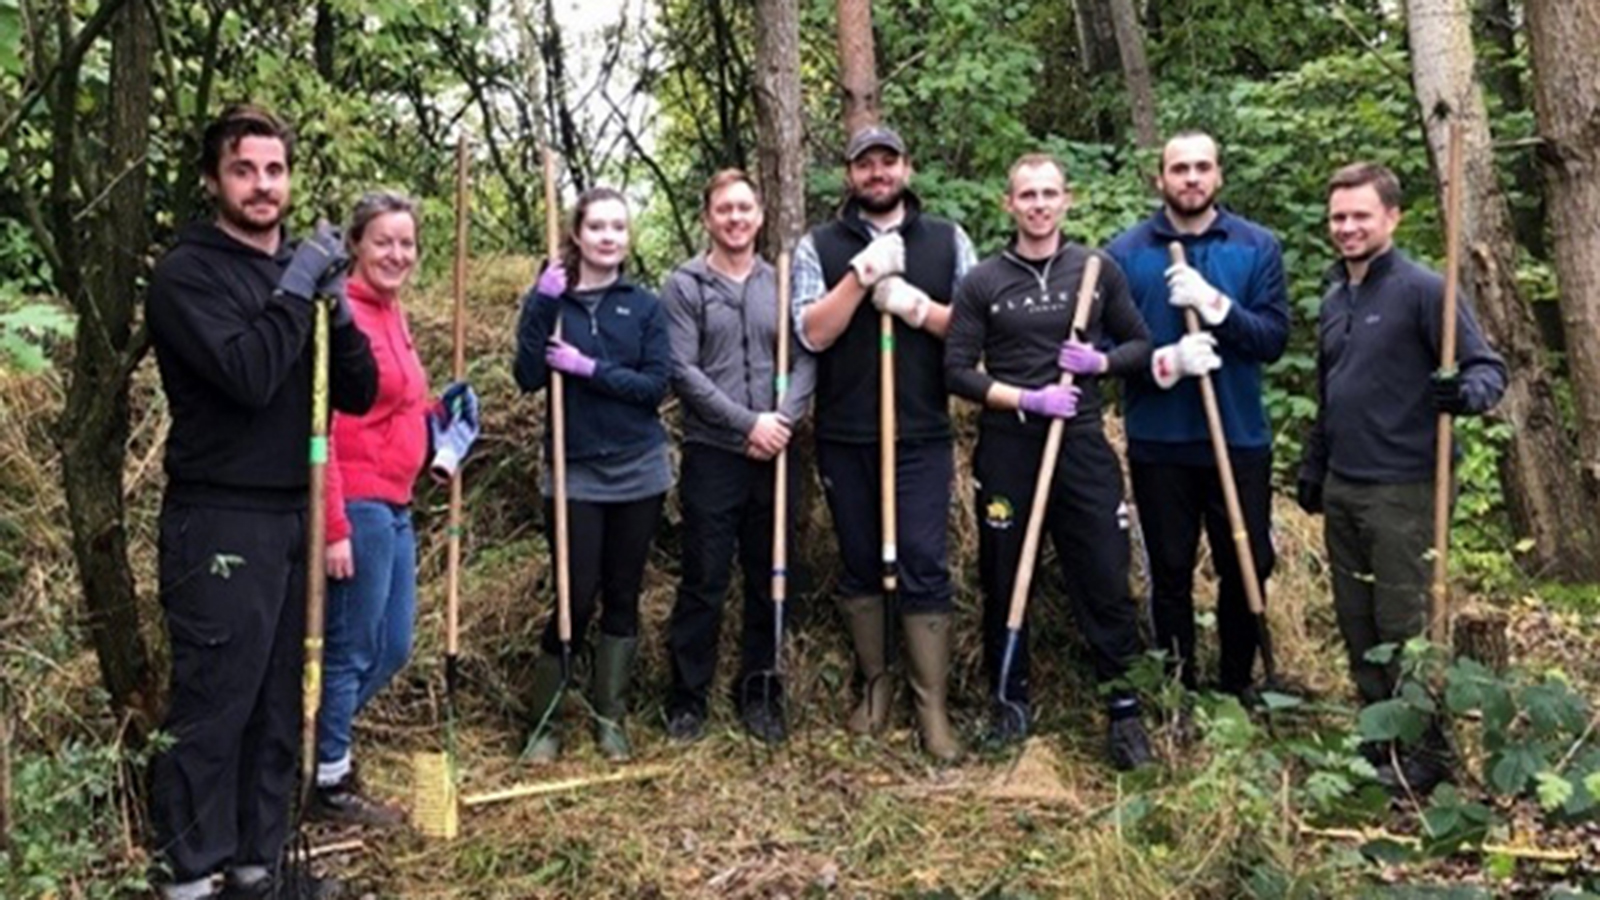 A group of people with various gardening tools such as spades, pitchforks and hoes.